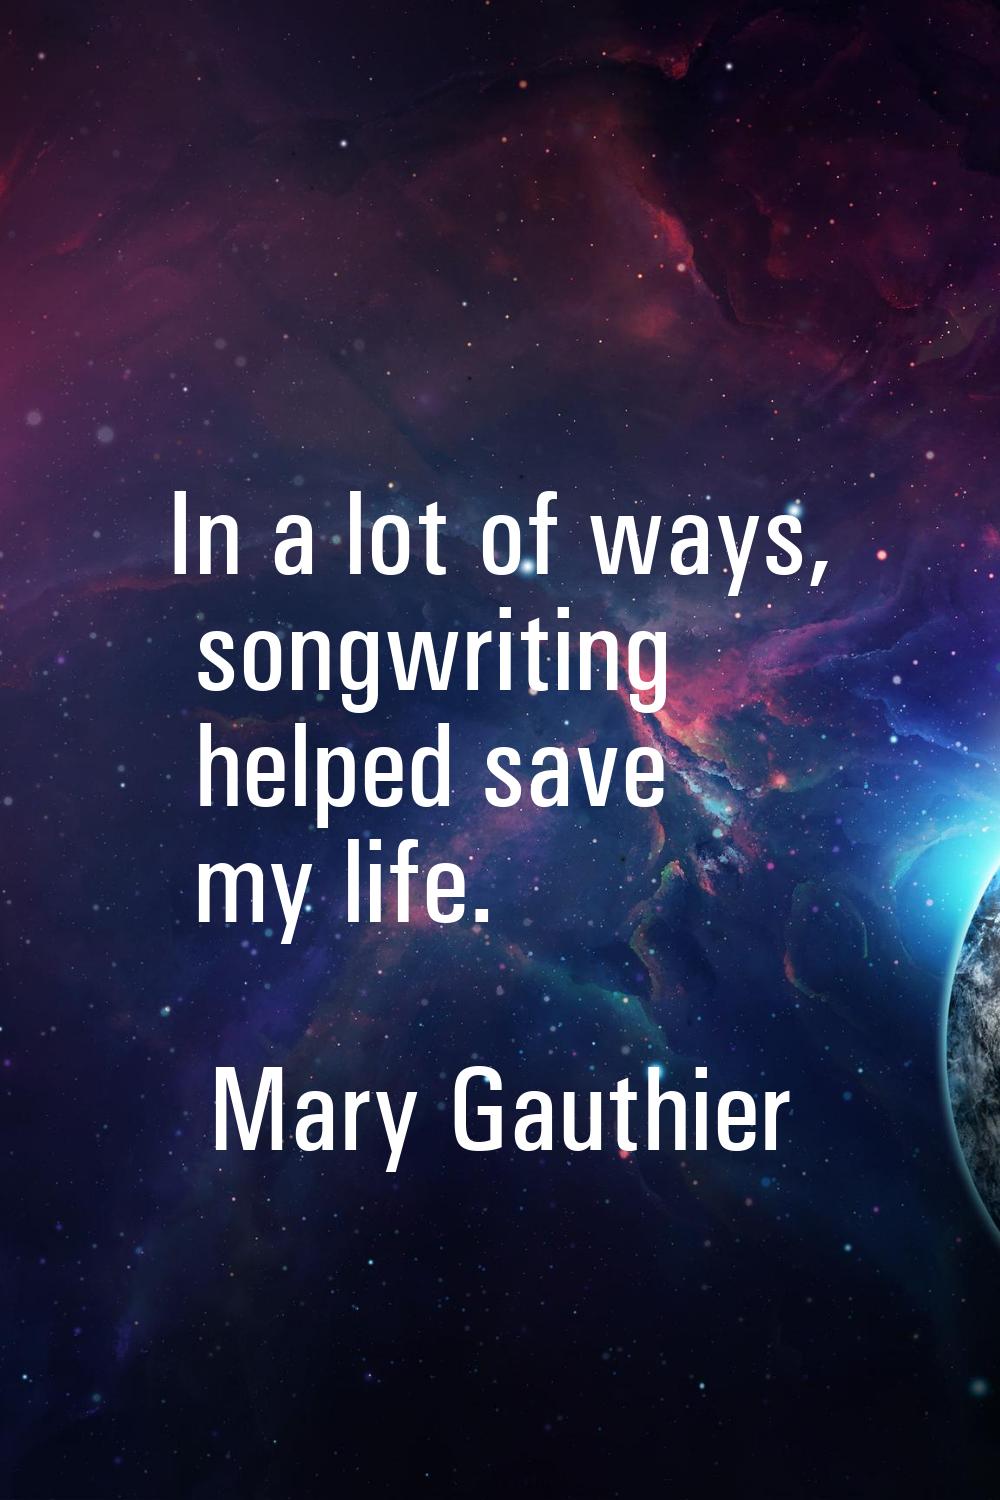 In a lot of ways, songwriting helped save my life.